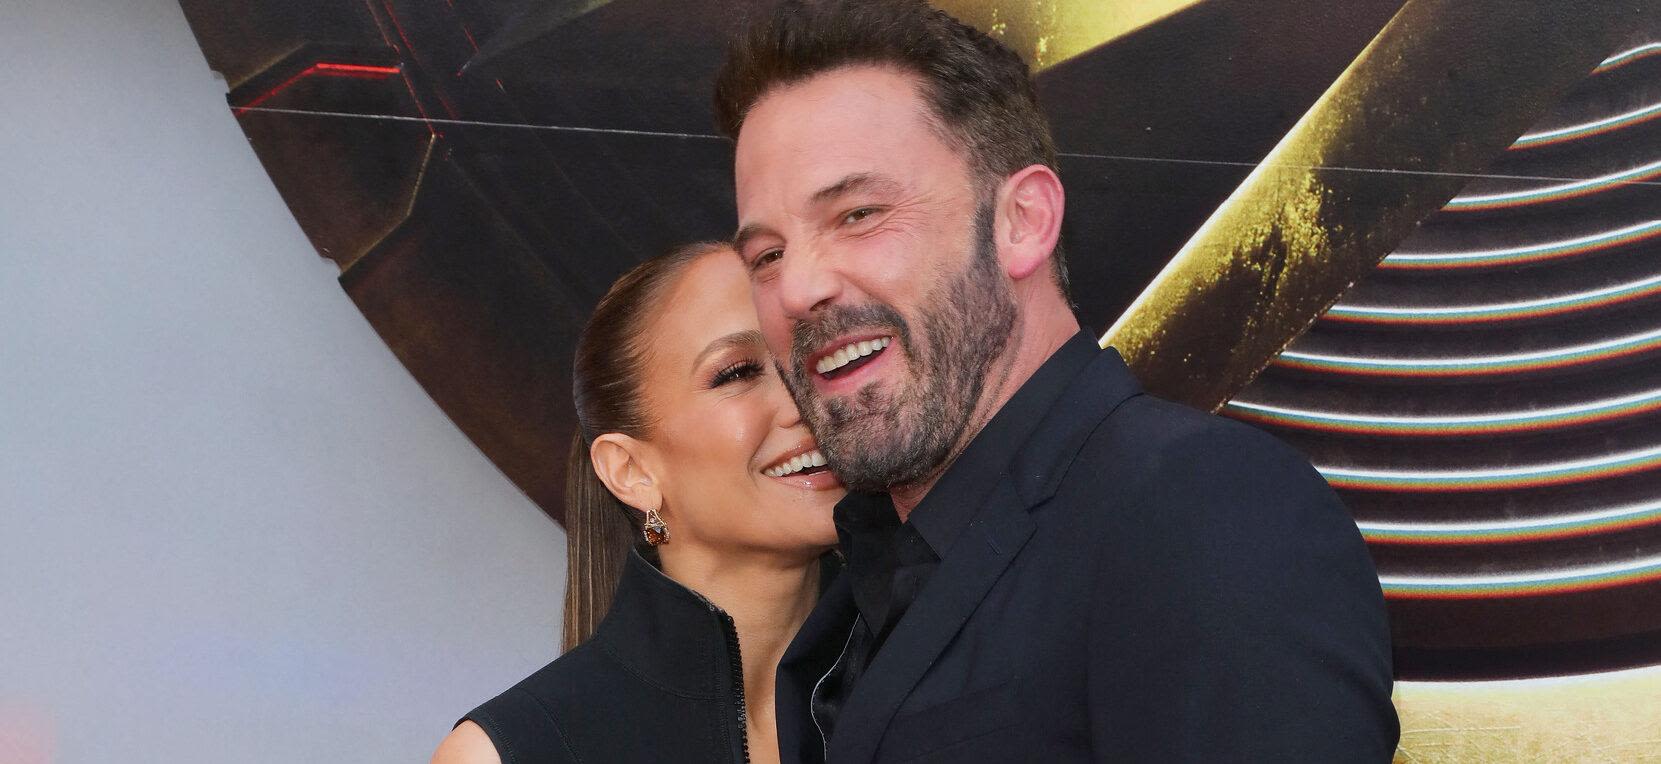 Jennifer Lopez Accused Of Having A 'Love Addiction' That Has Strained Marriage To Ben Affleck